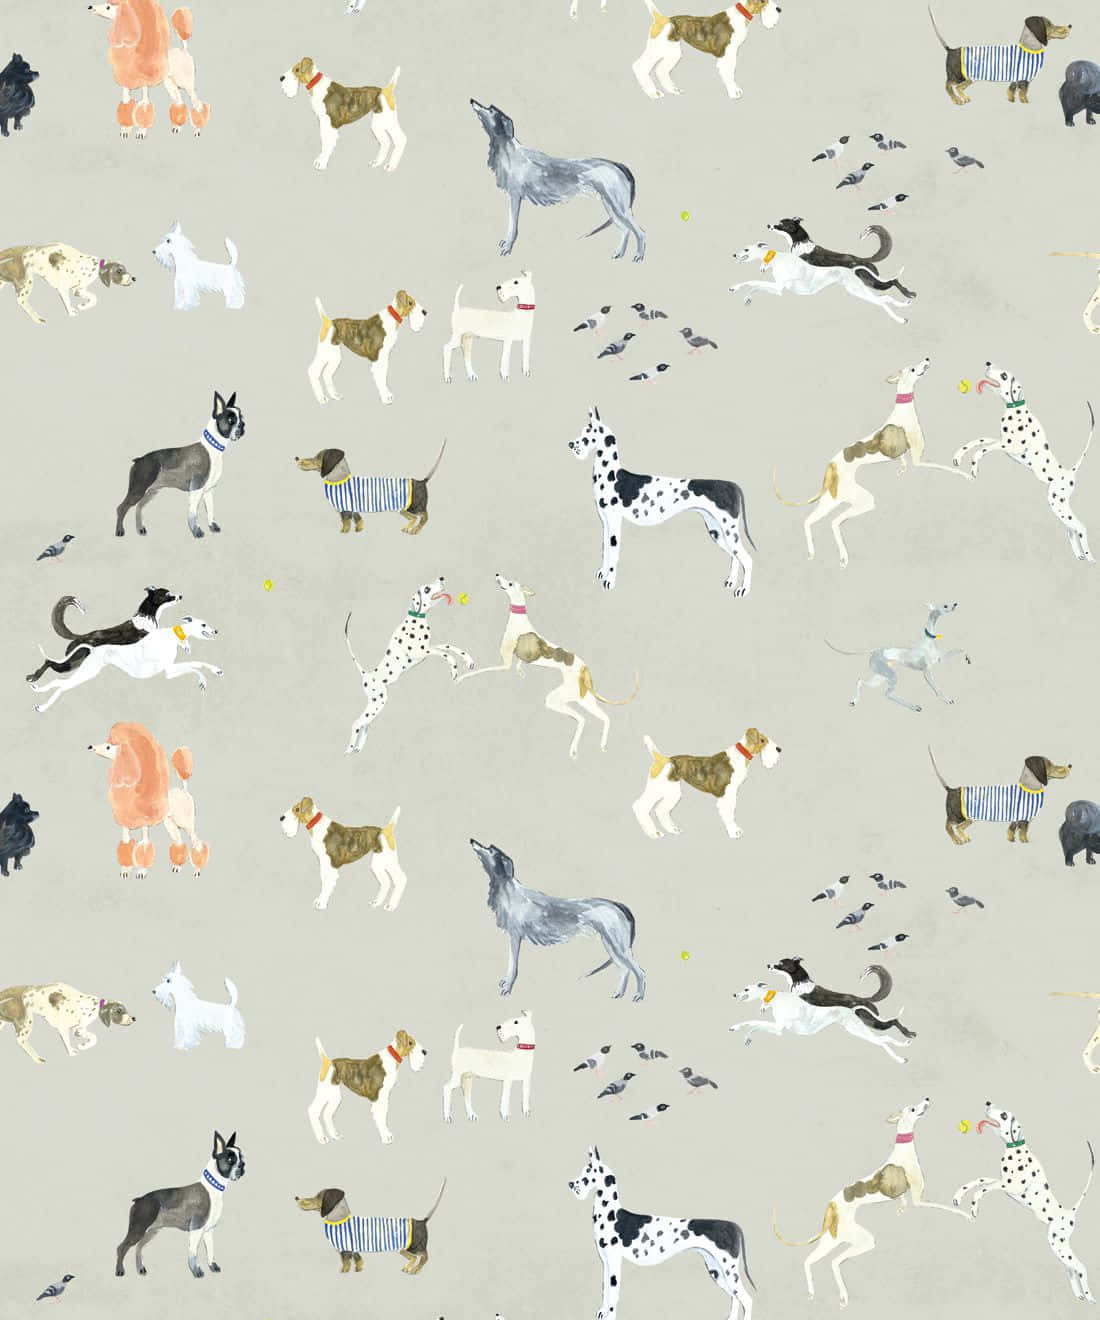 A Dog Pattern With Many Dogs On It